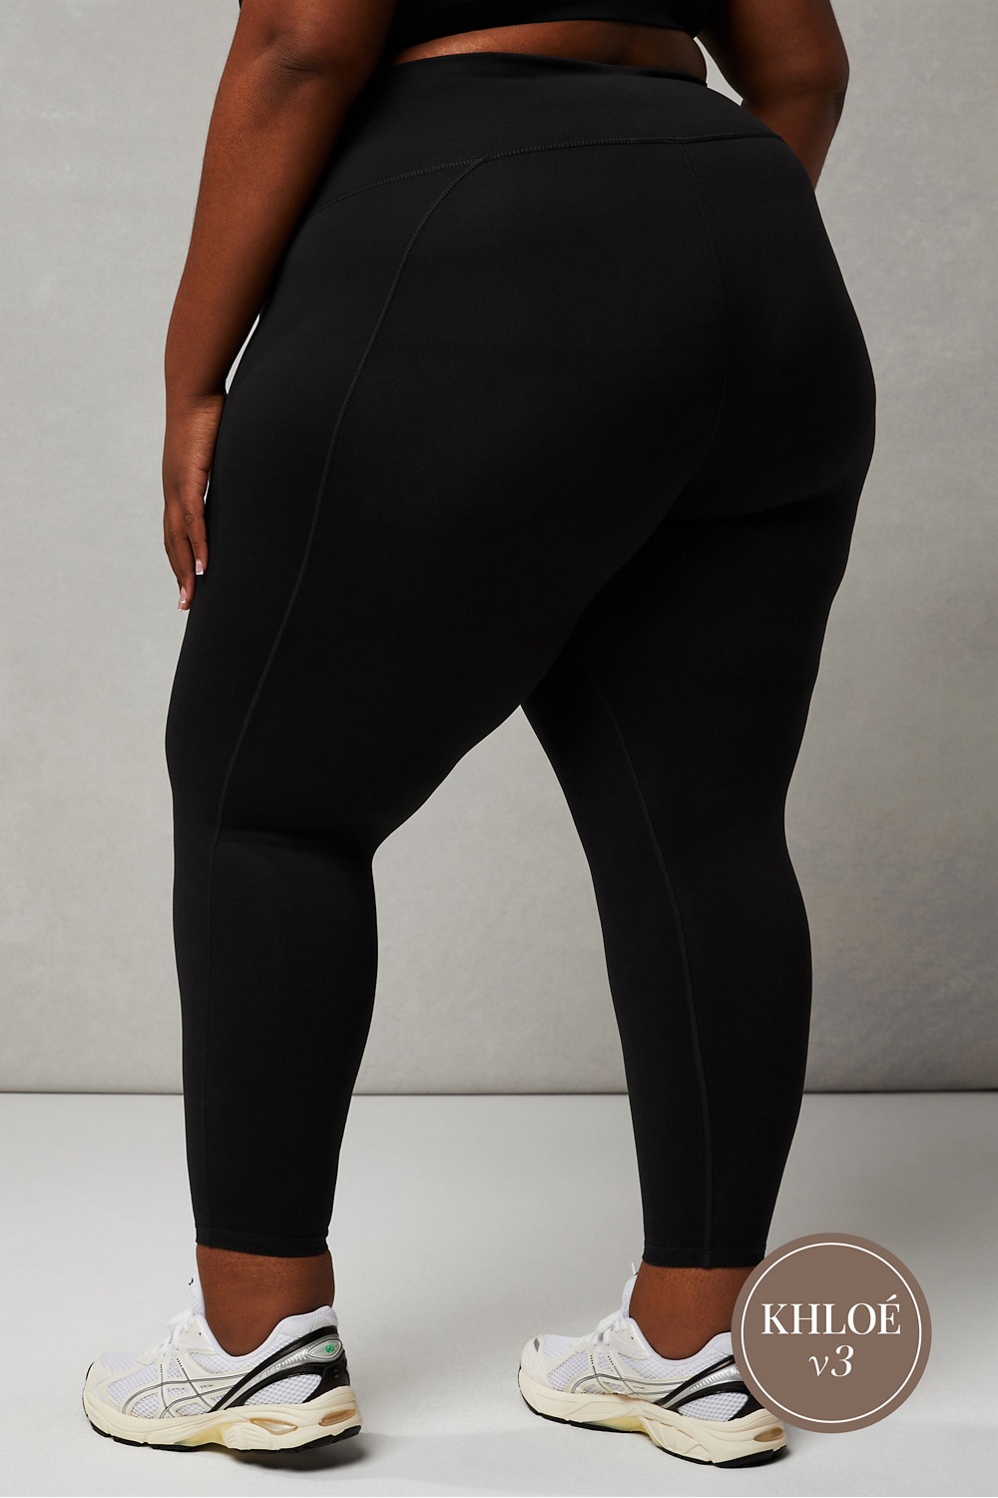 Fabletics Pants Size Medium W25L23 Mosaic High Waisted 7/8 Leggings  Activewear Black - $33 - From Javier